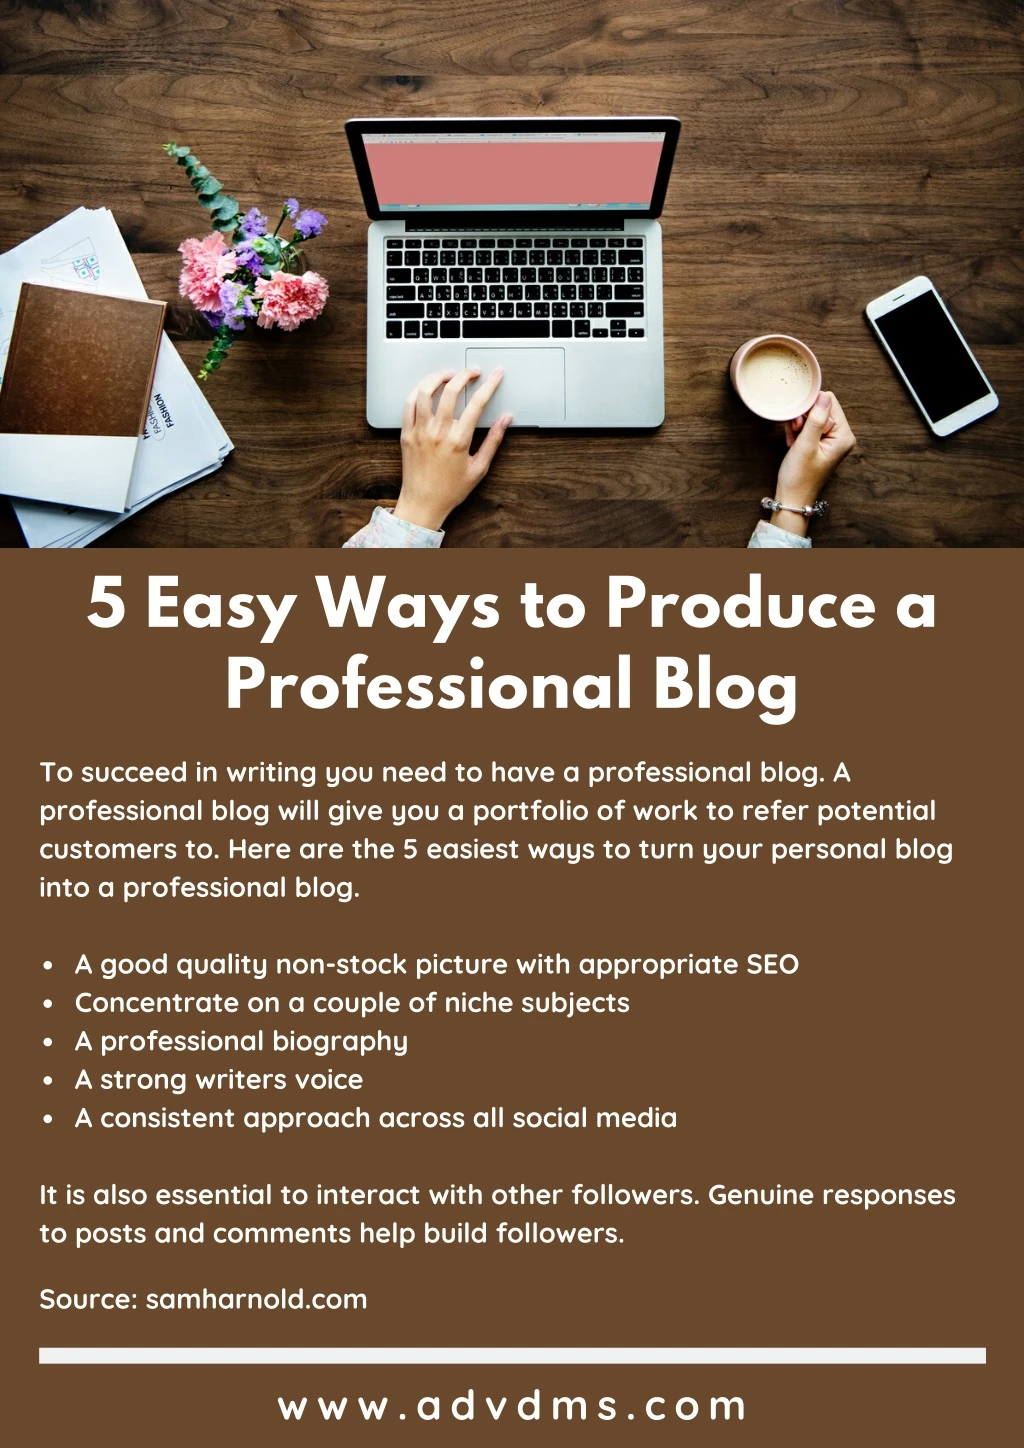 5 easy ways to produce a professional blog